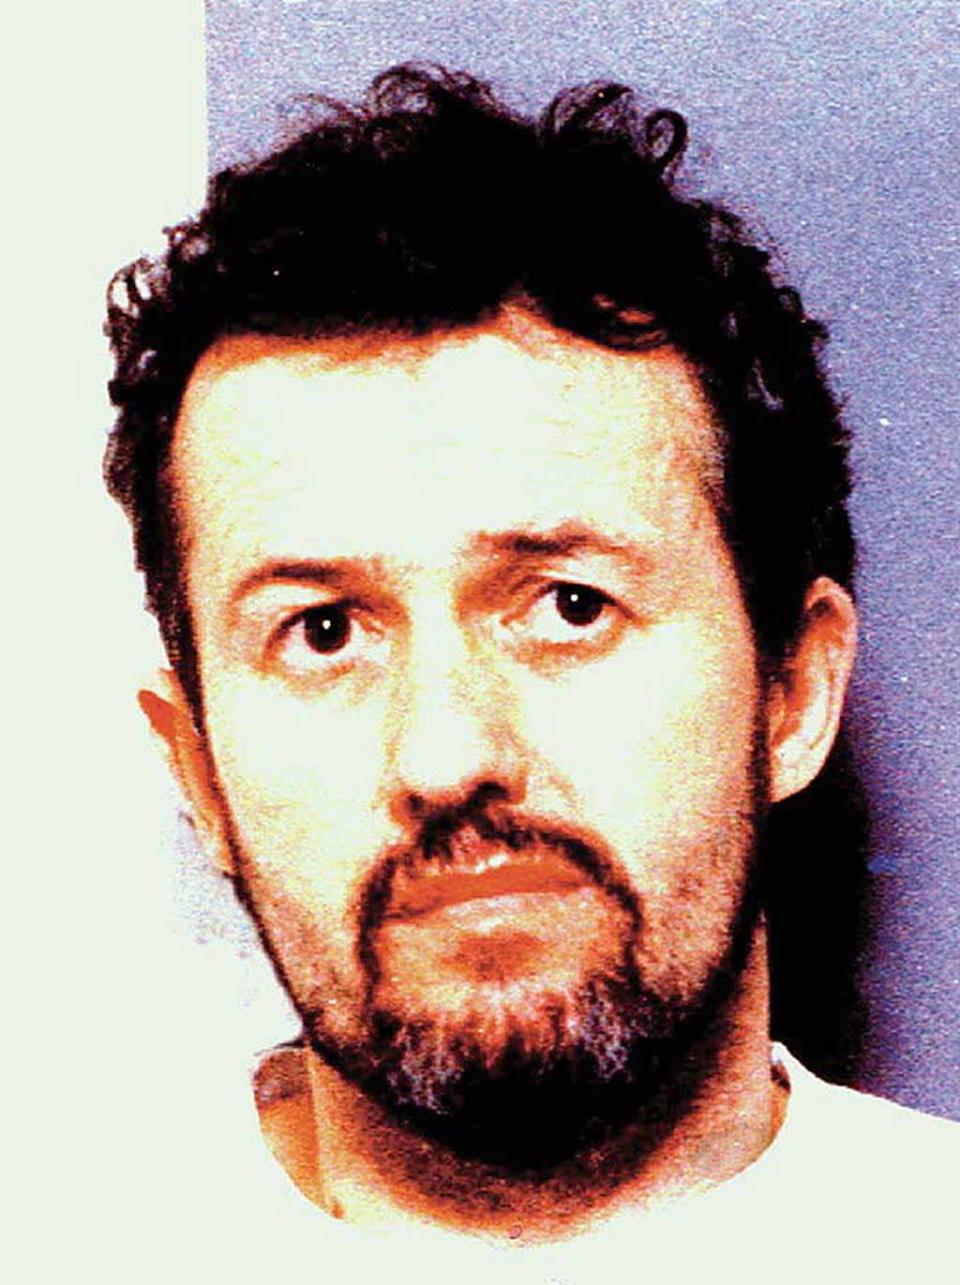 Undated file photo of ex-football coach and convicted paedophile Barry Bennell (PA Wire)